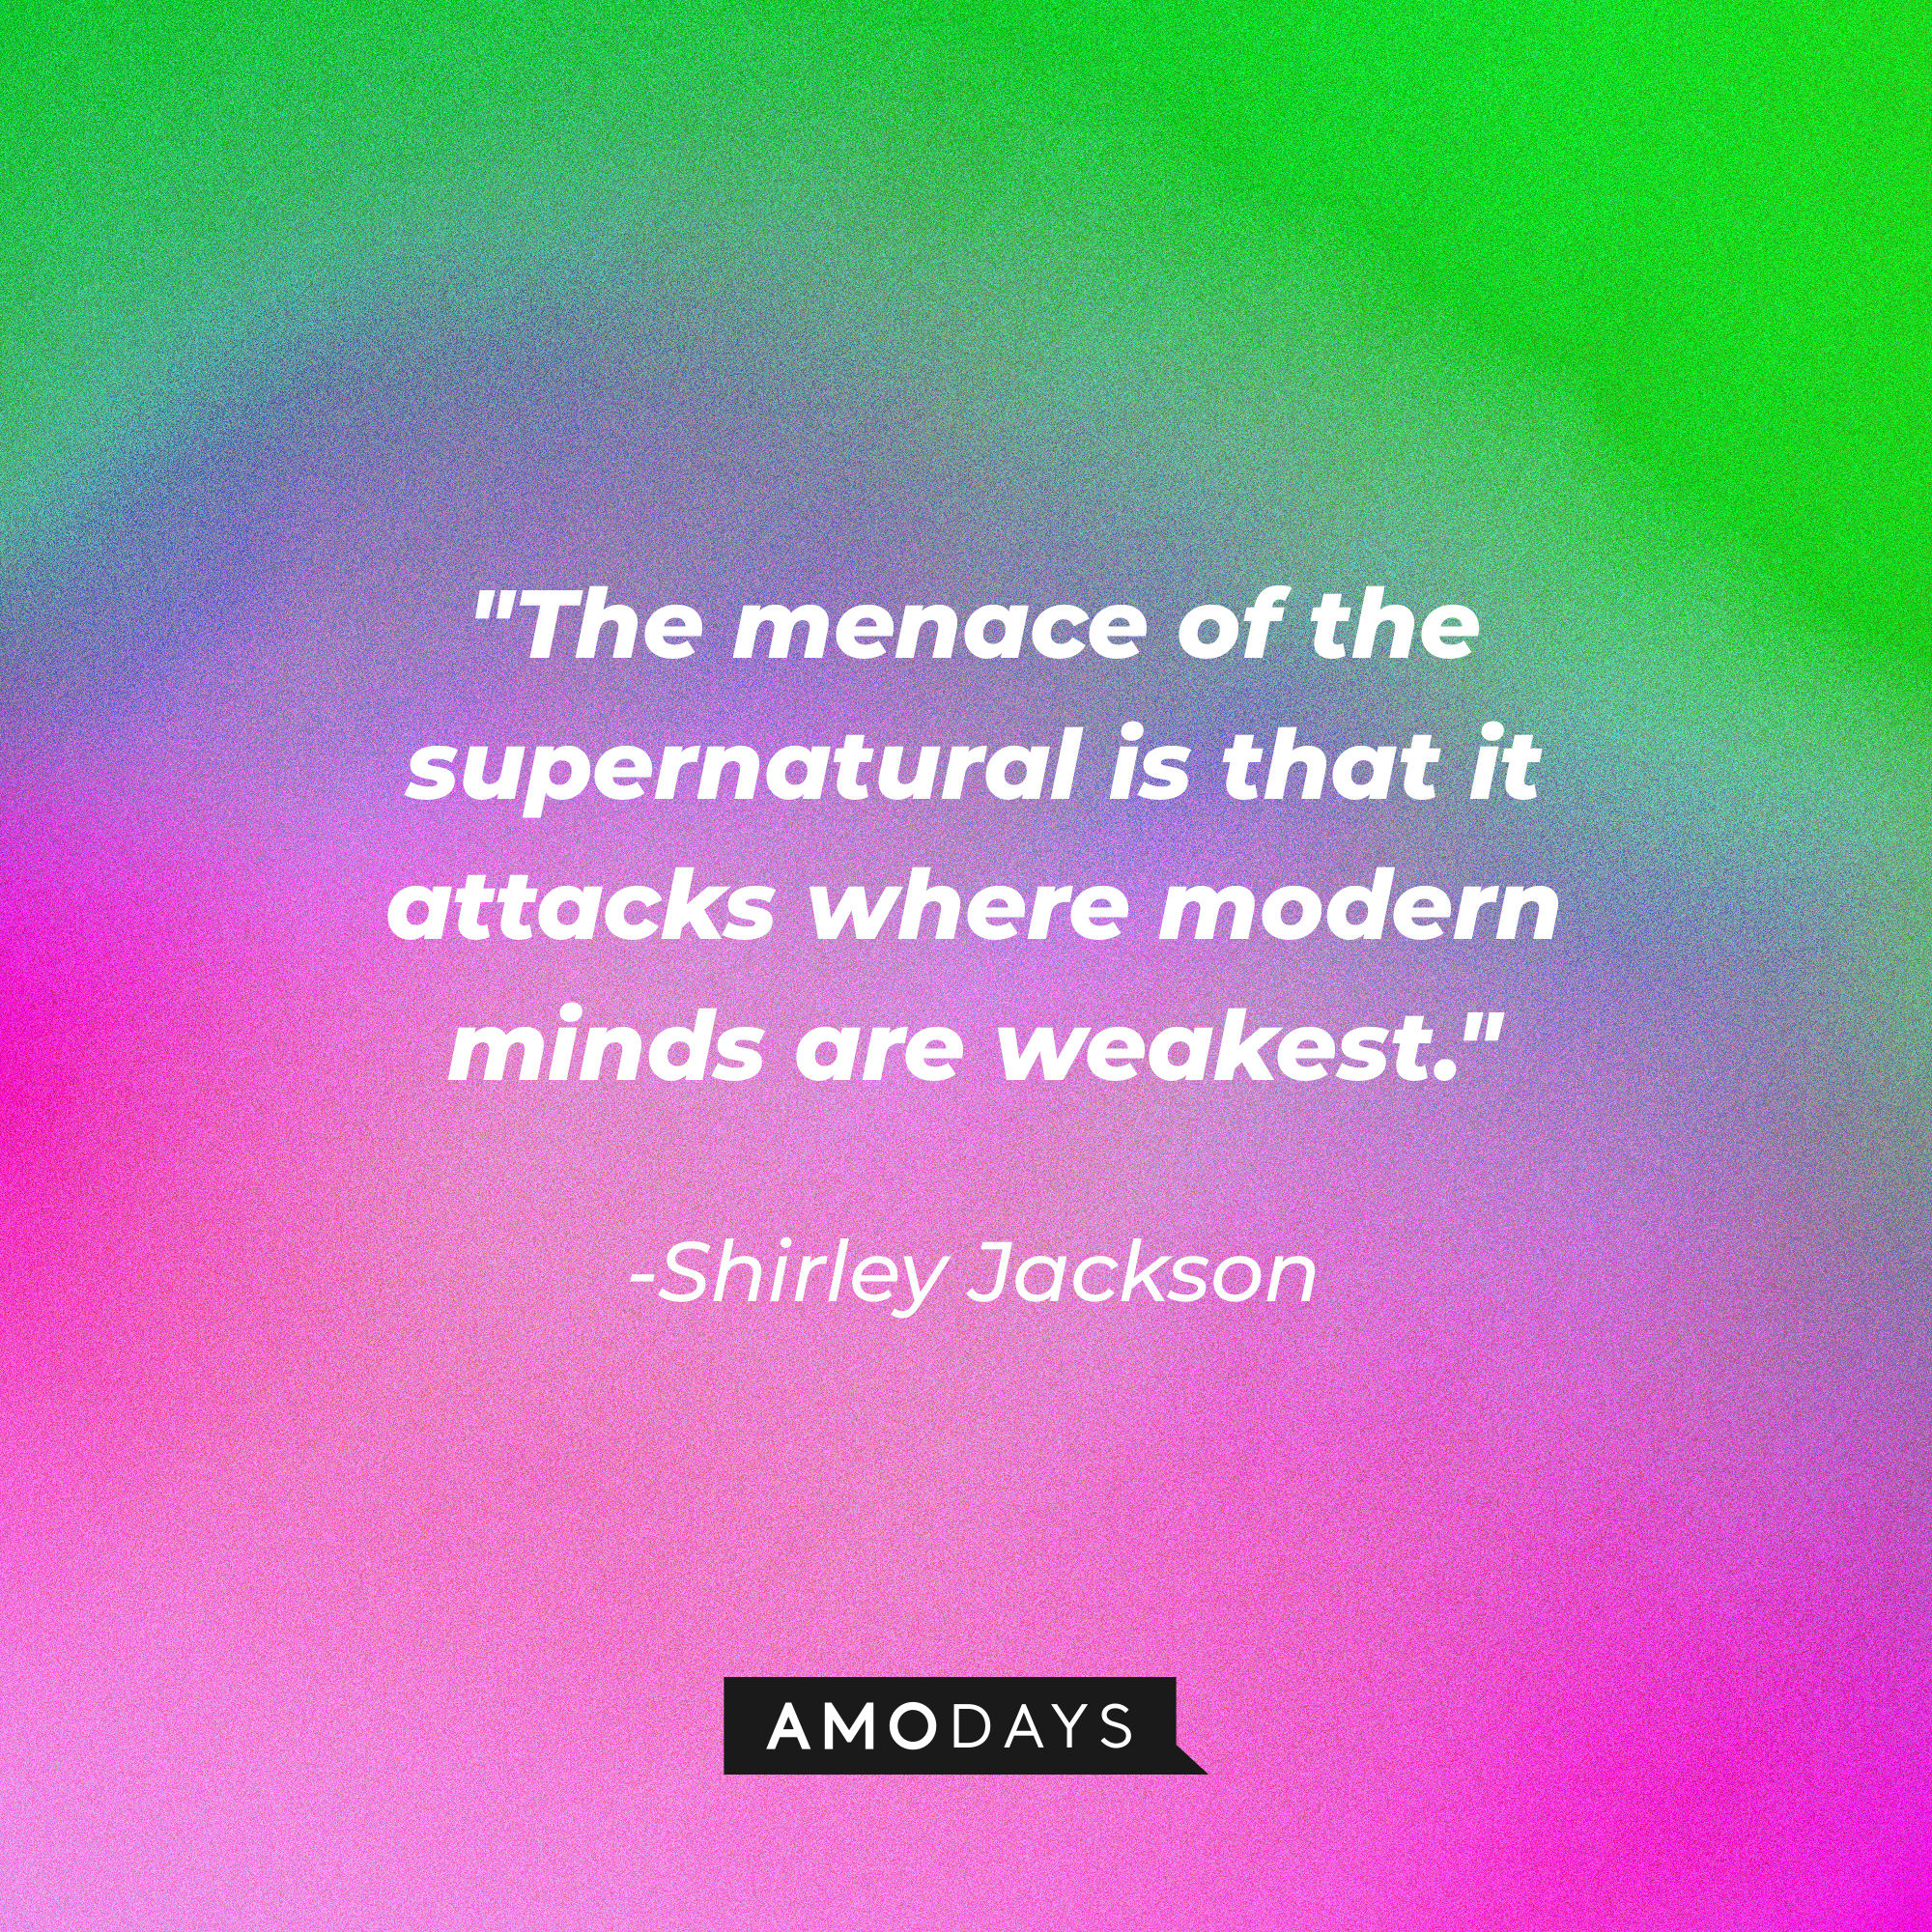 Shirley Jackson's quote: "The menace of the supernatural is that it attacks where modern minds are weakest." | Source: AmoDays